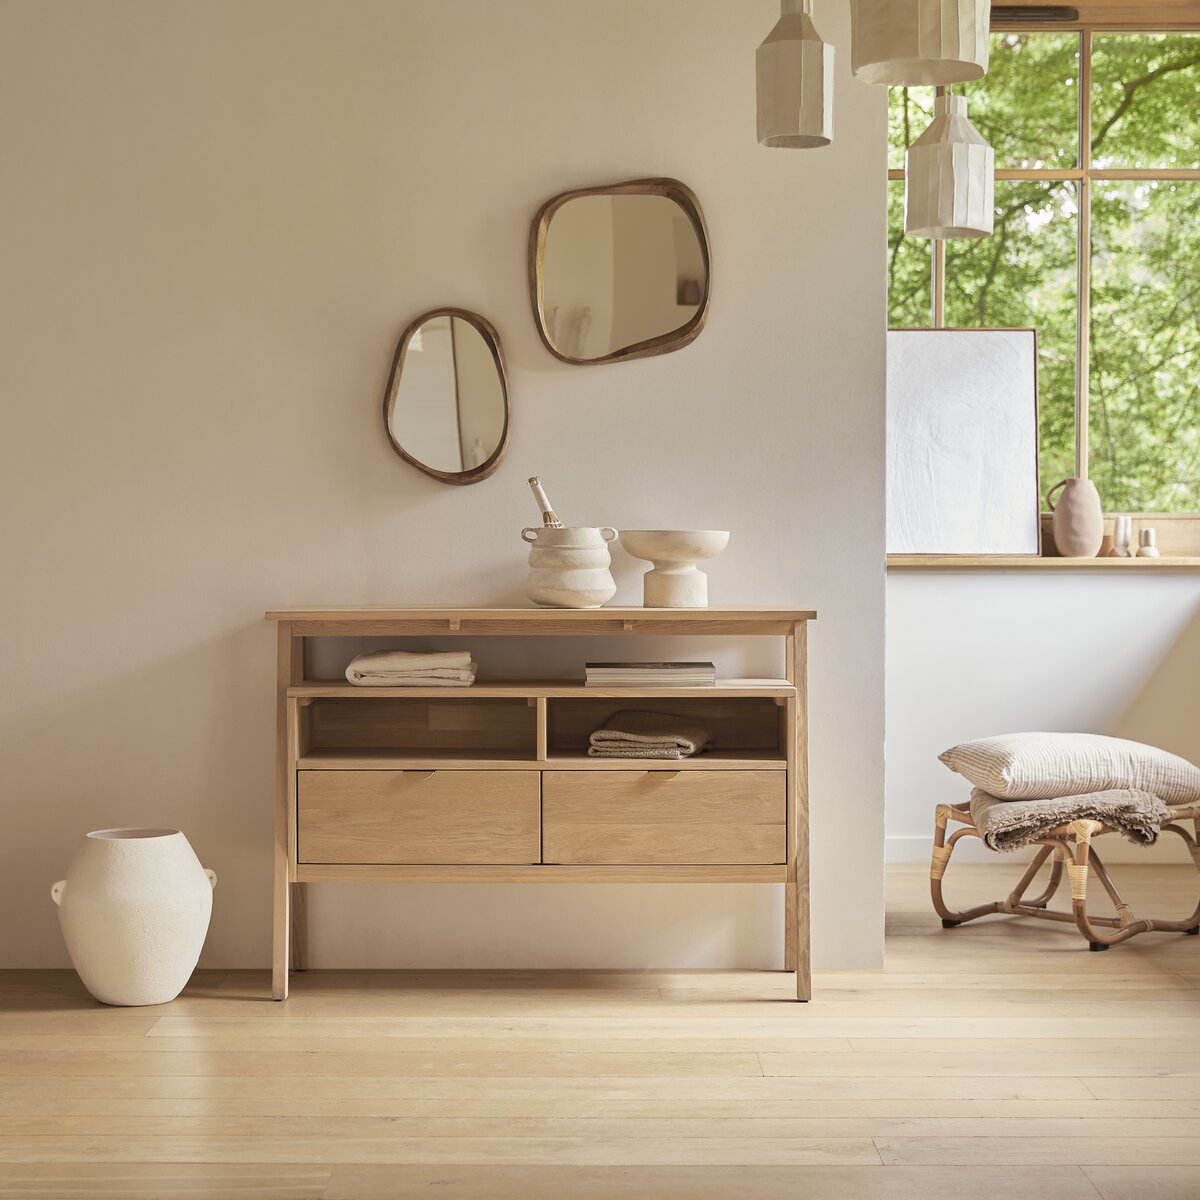 Pola - Solid oak 2-drawer Console table